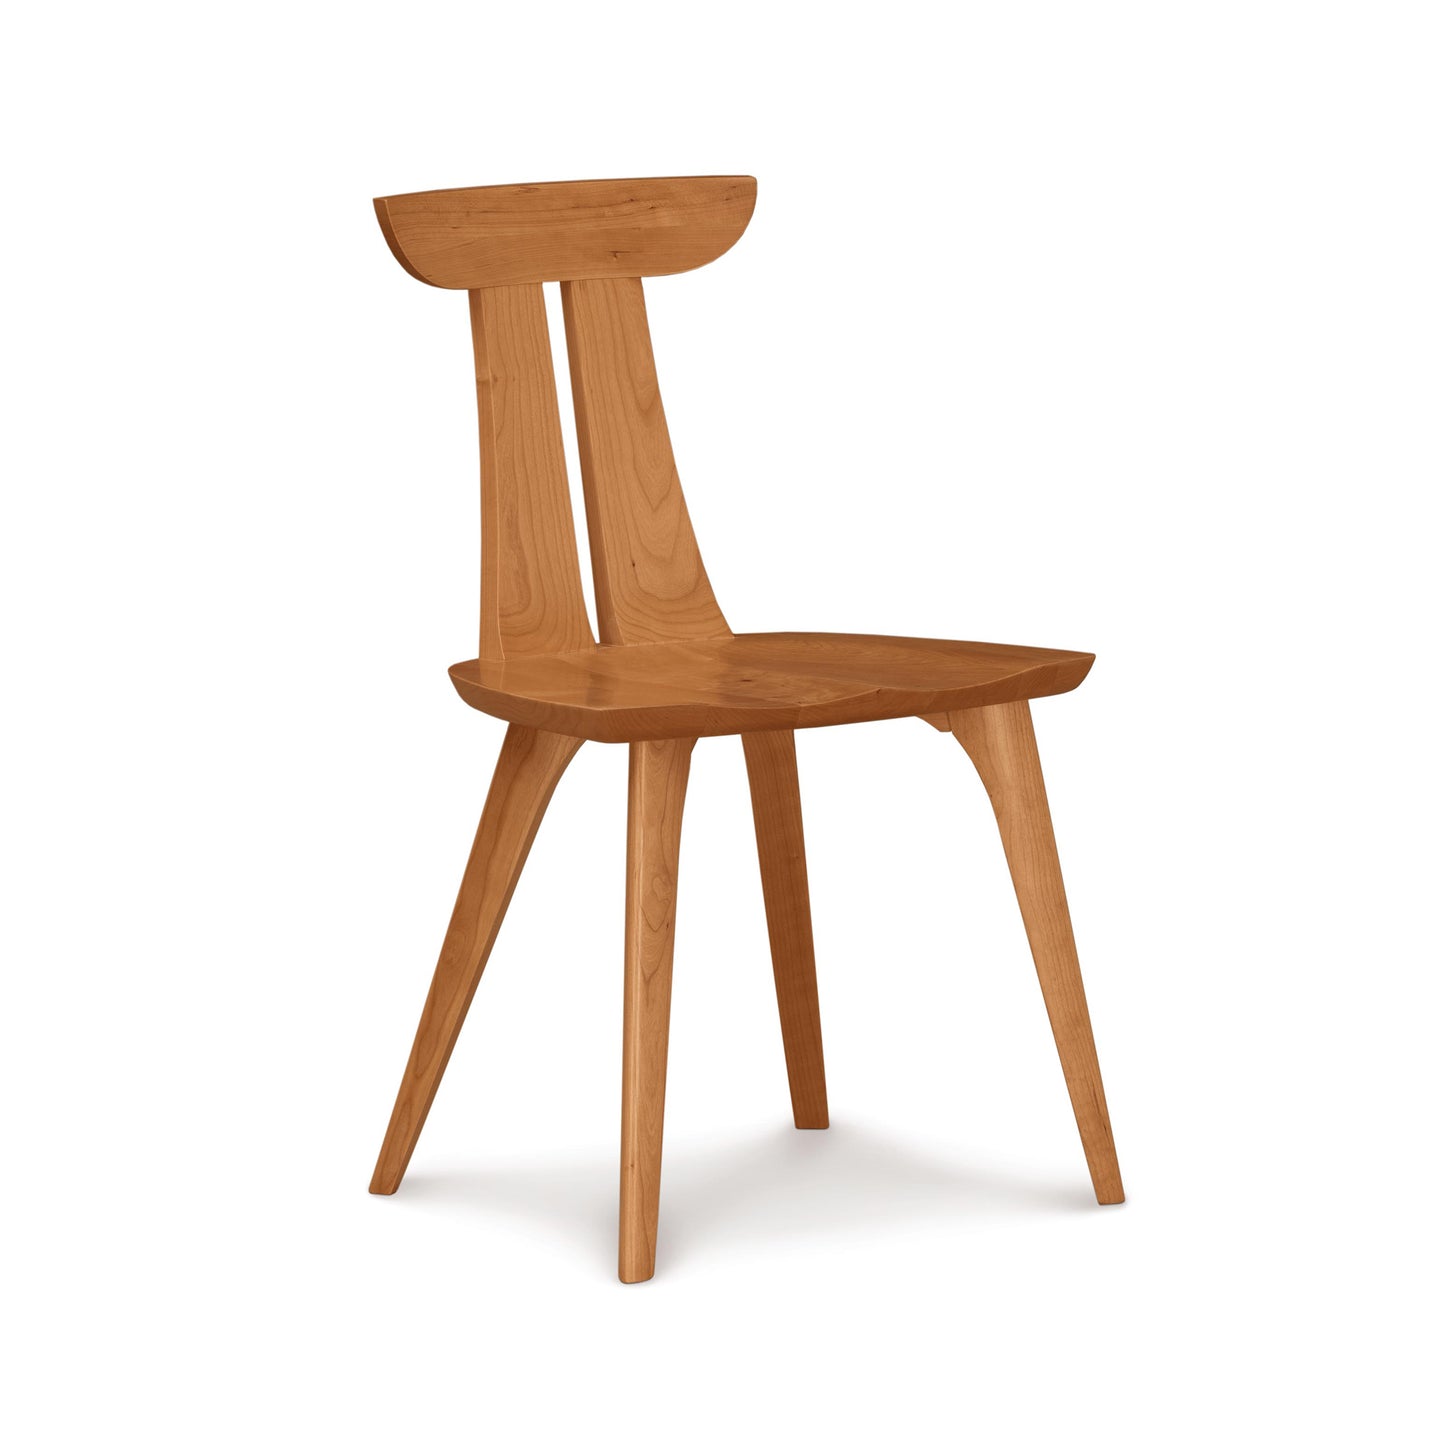 A simple Copeland Furniture Estelle cherry dining chair with a curved backrest and angled legs, isolated on a white background.